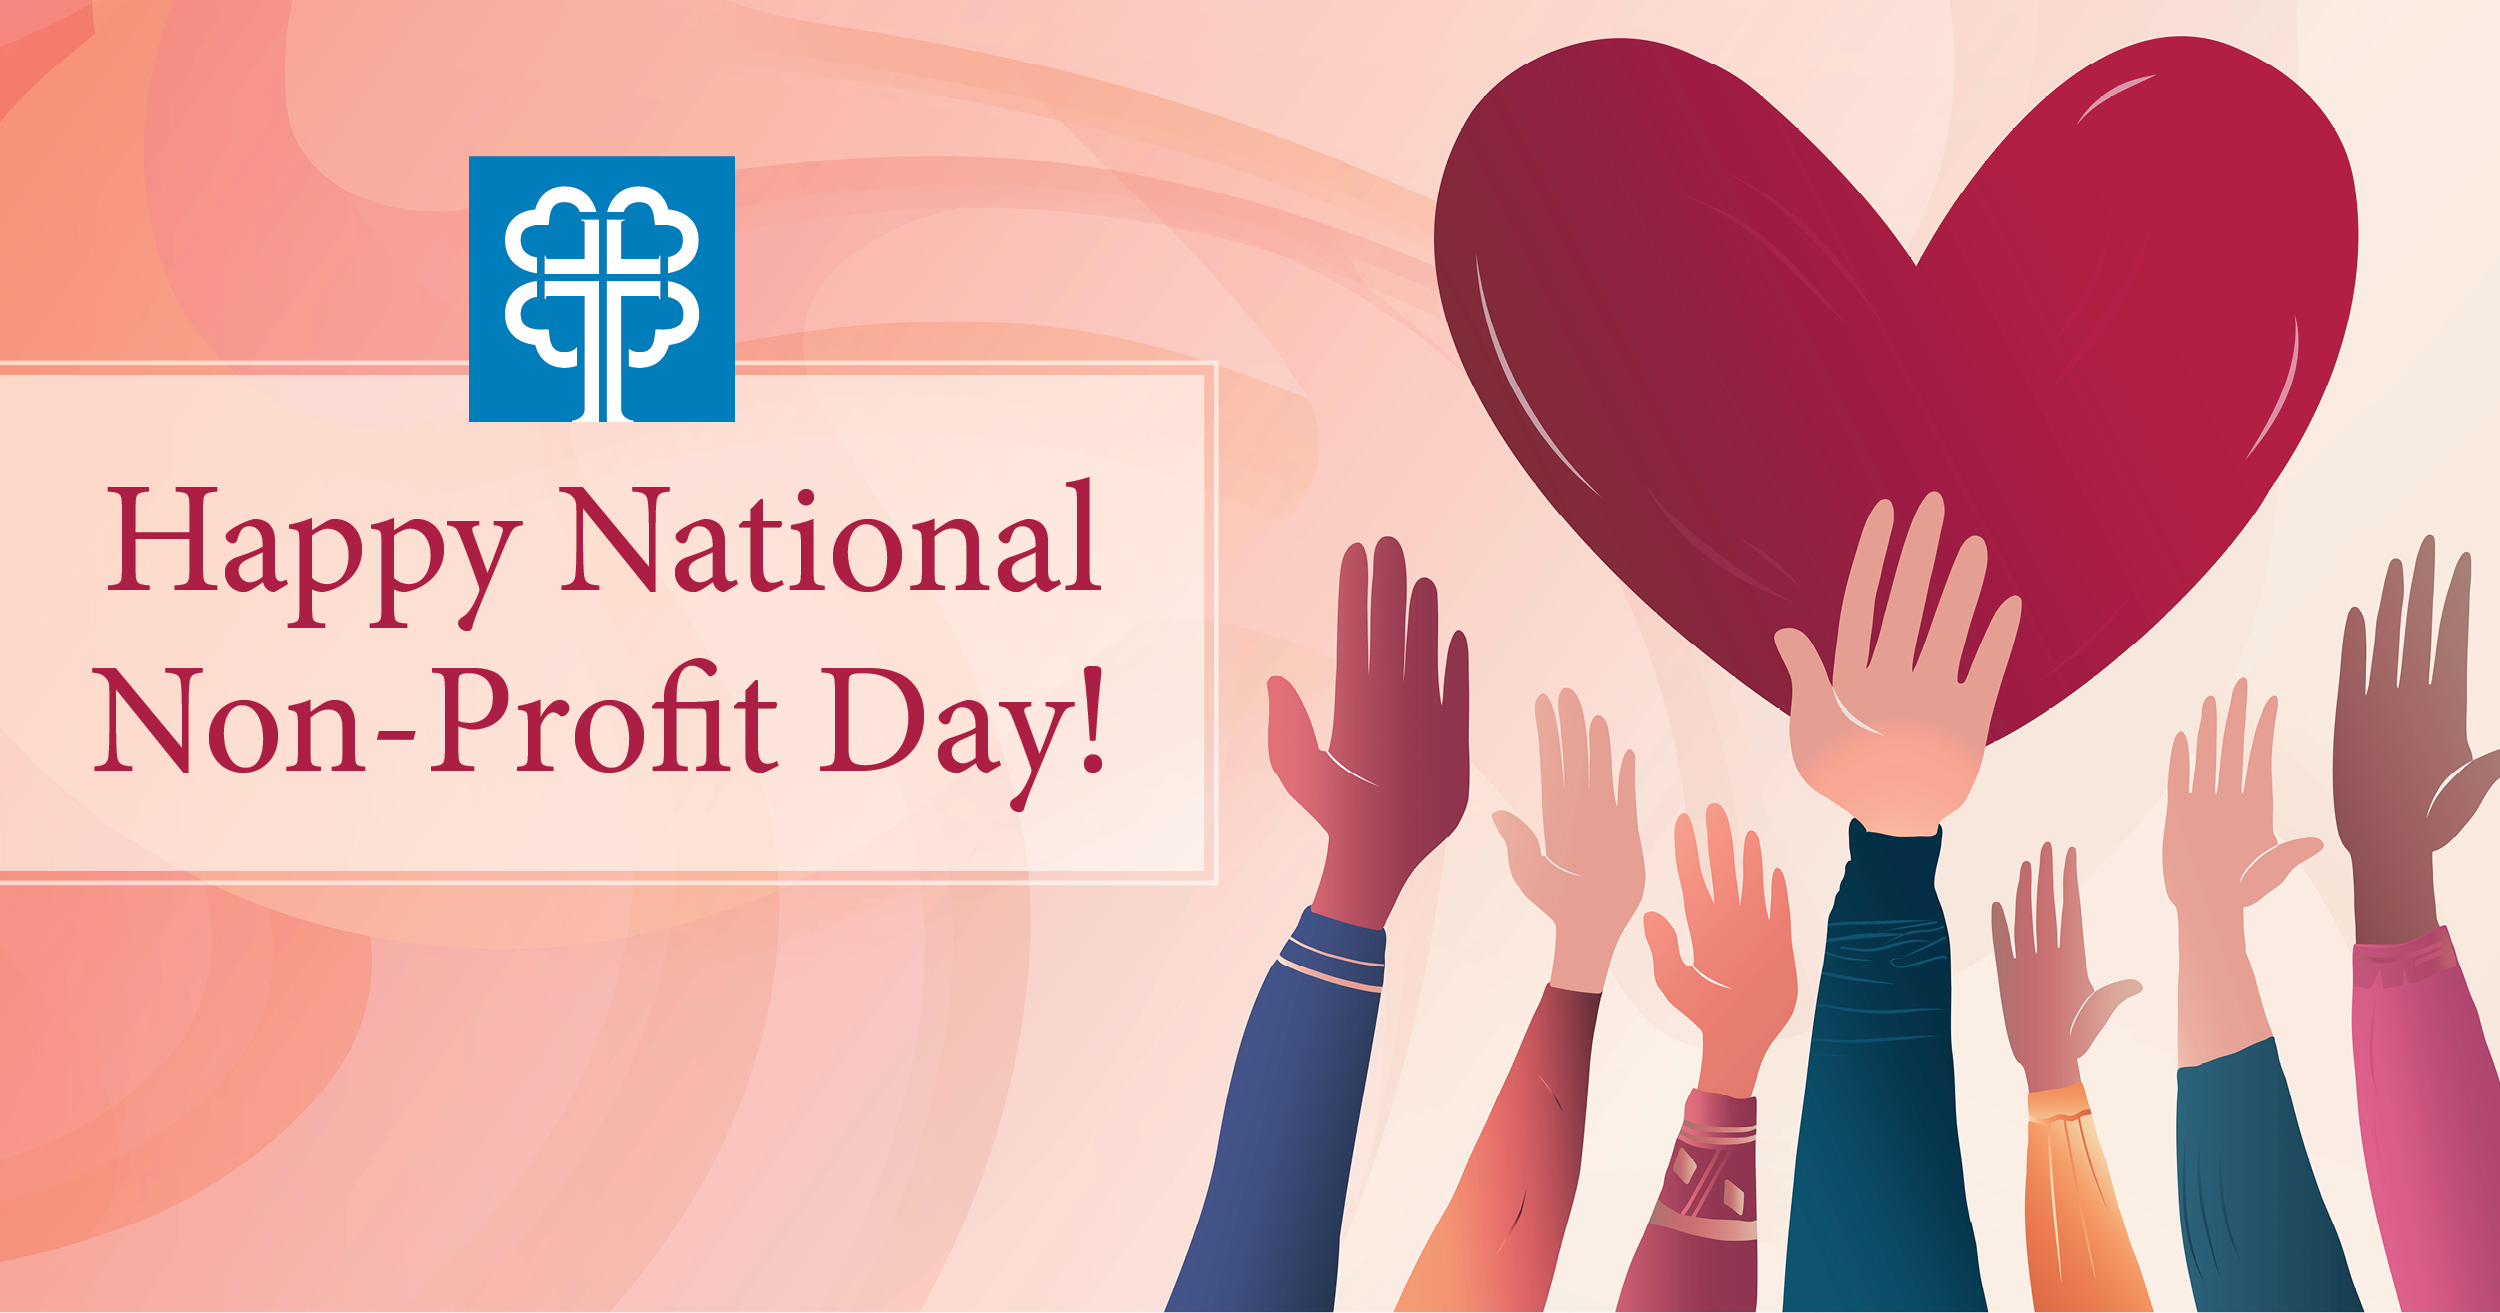 National Non-Profit Day